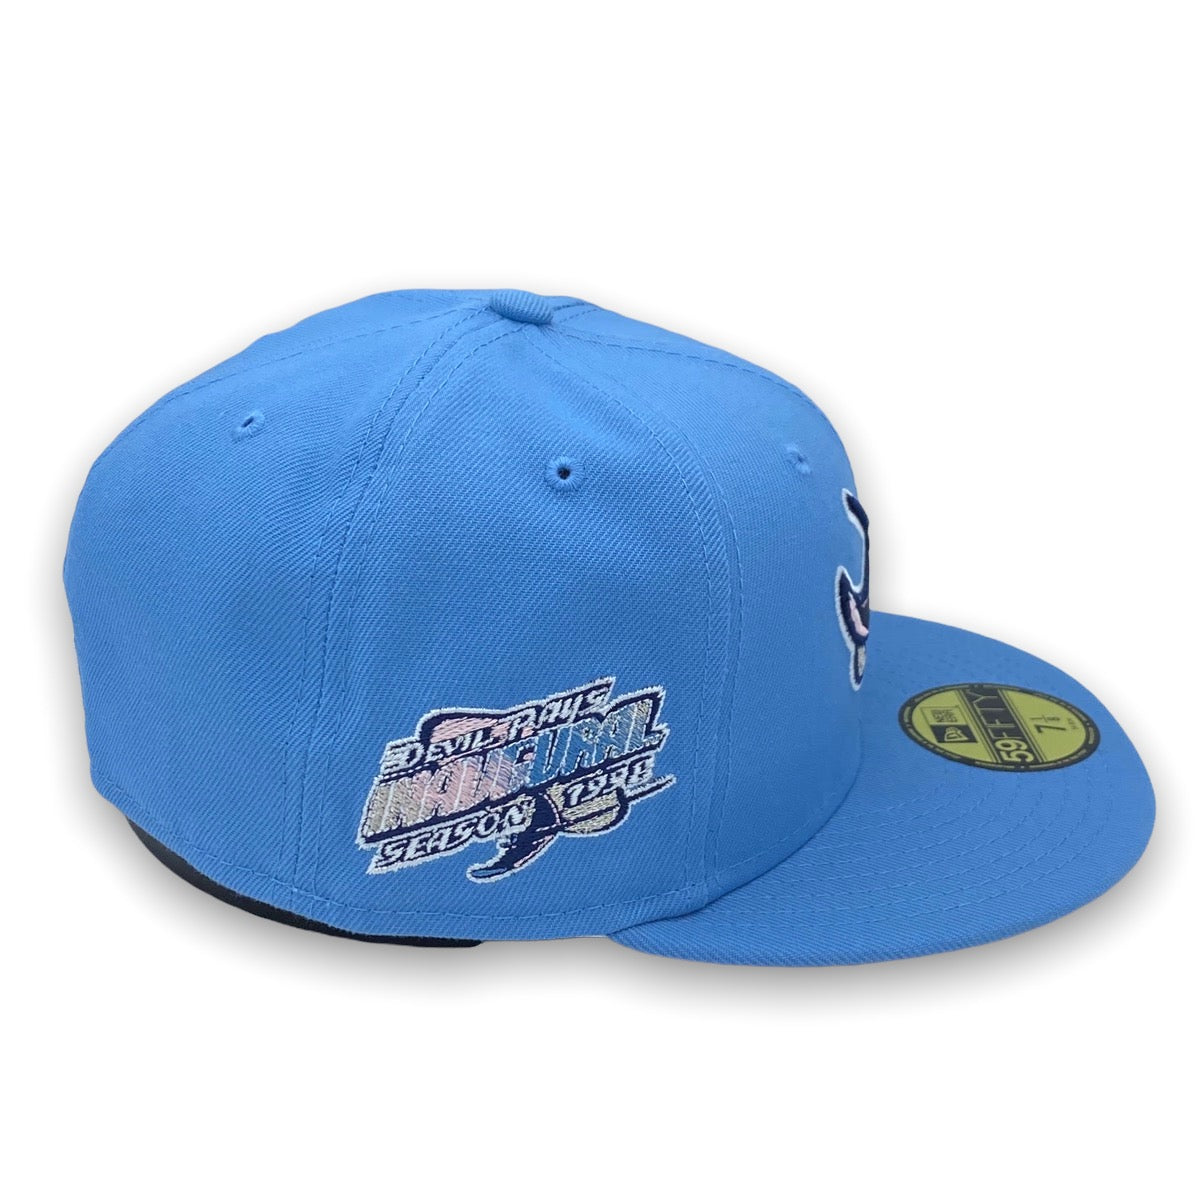 Cotton Candy Coll. Tampa Bay Rays 98 IS. New Era 59FIFTY Sky Blue